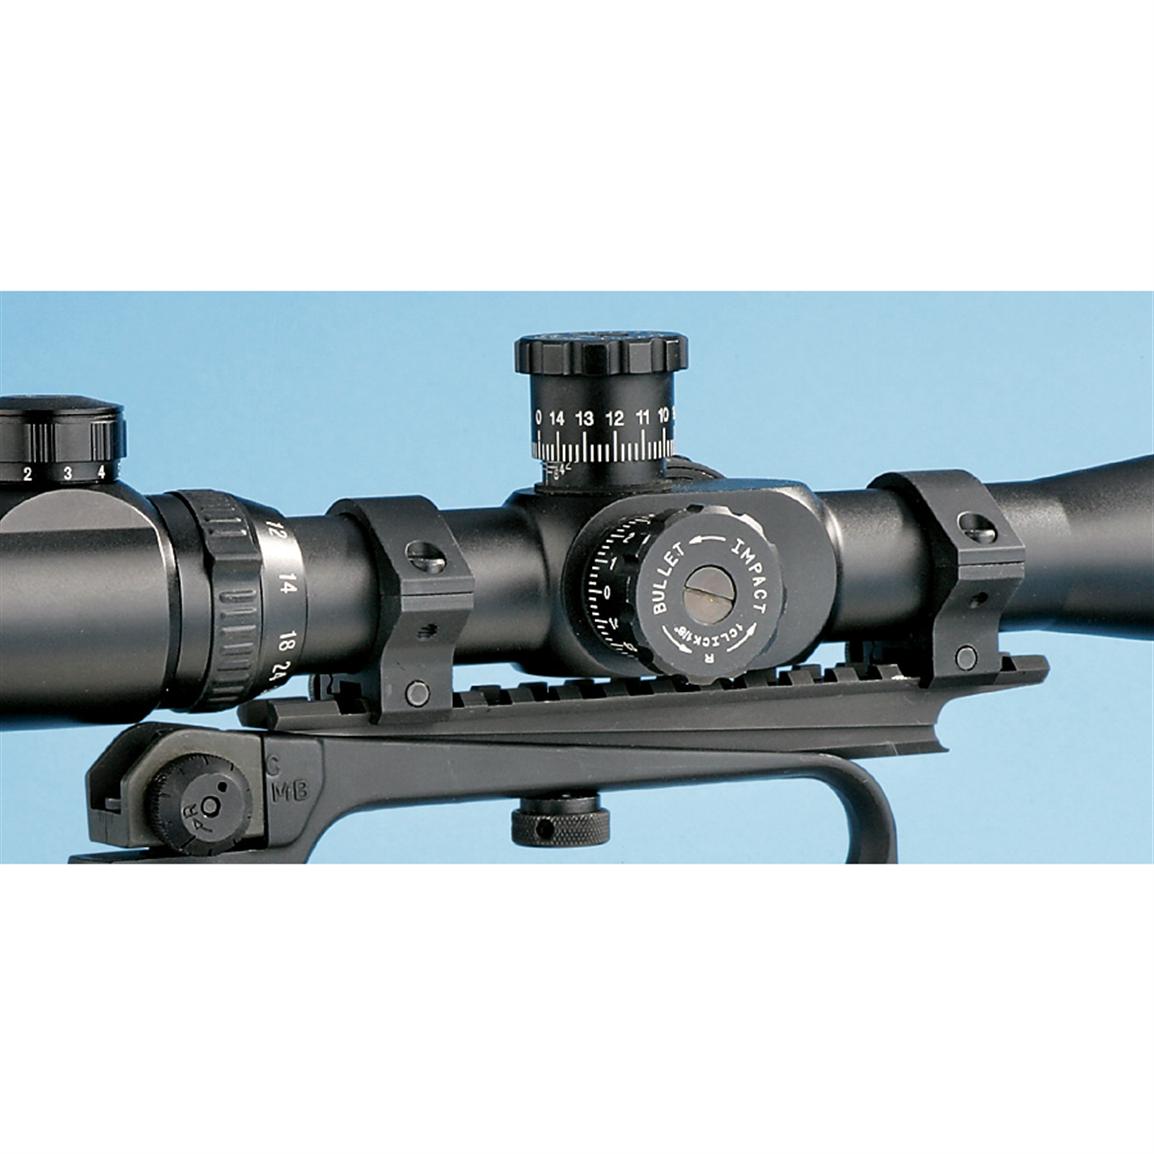 AR 15 Carry Handle Scope Mount: A Complete Guide - News Military